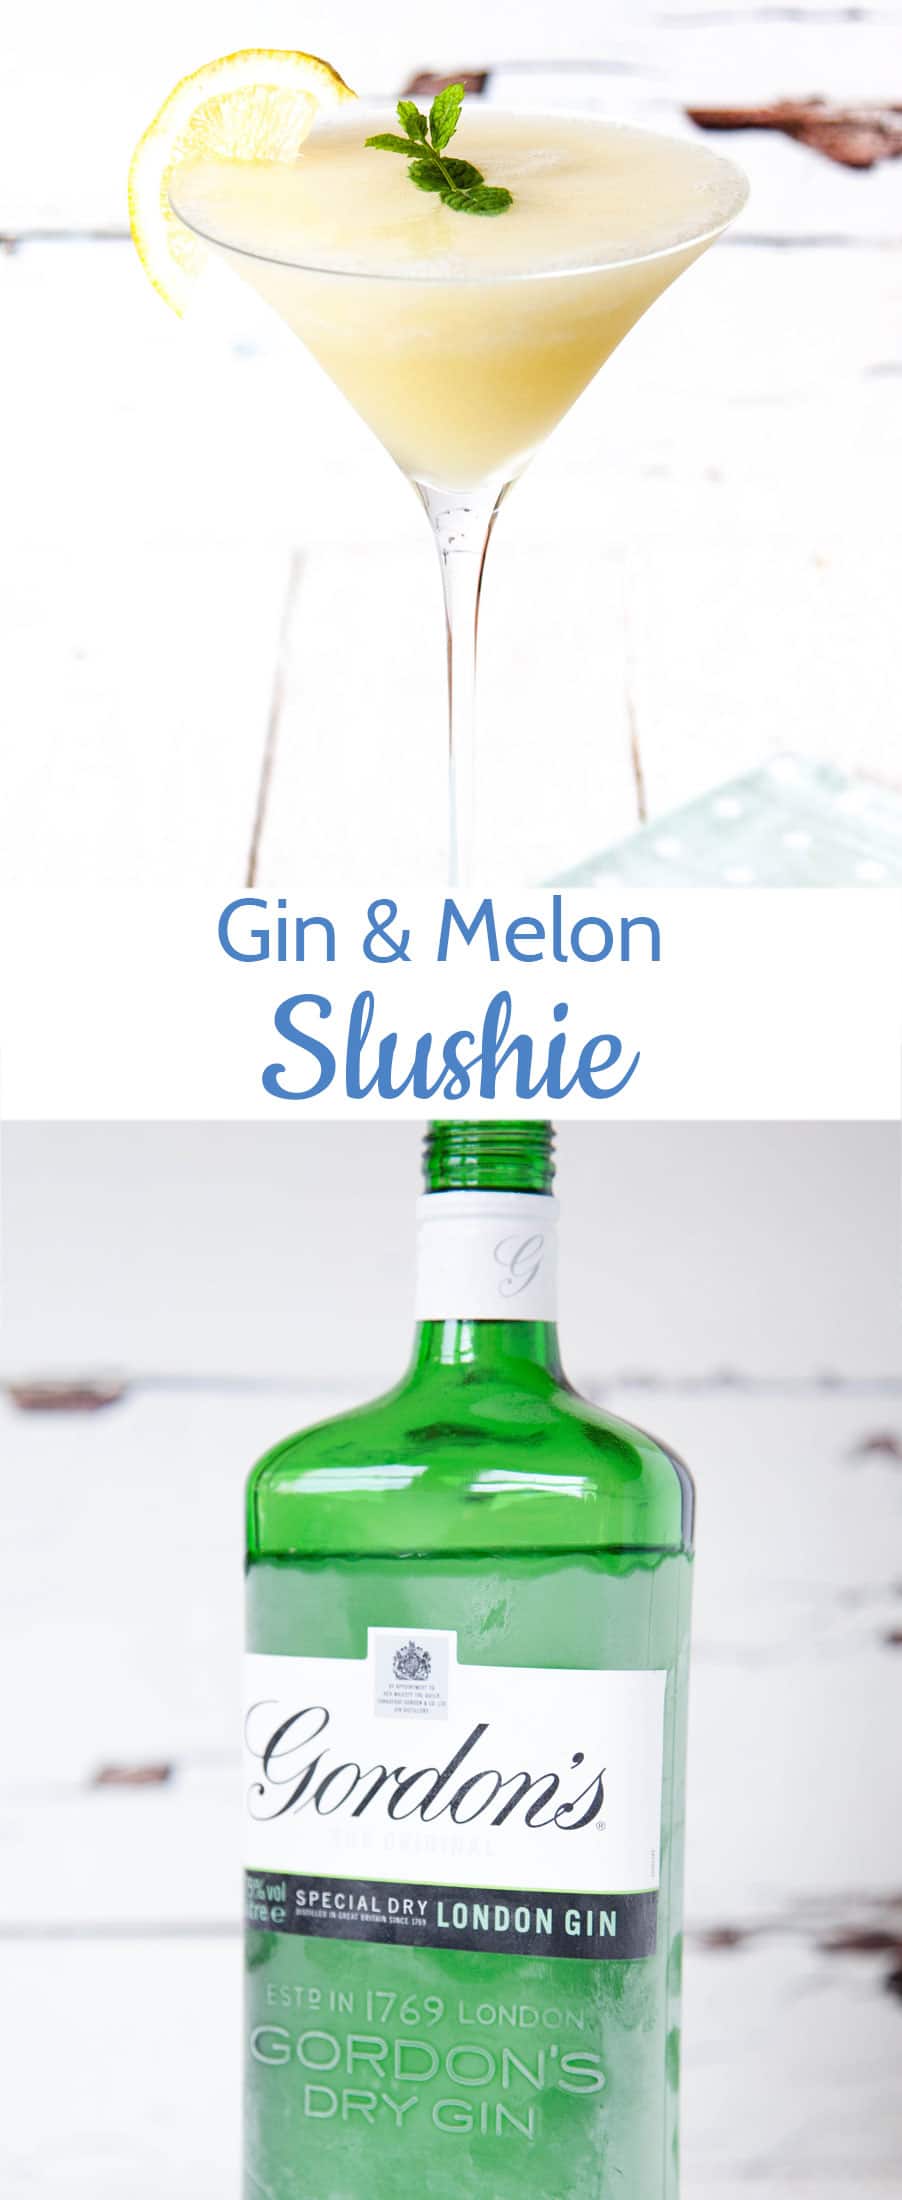 This gin and lemon slushie cocktail is perfect and refreshing for the hottest days of summer. Whizz in the blender and freeze!